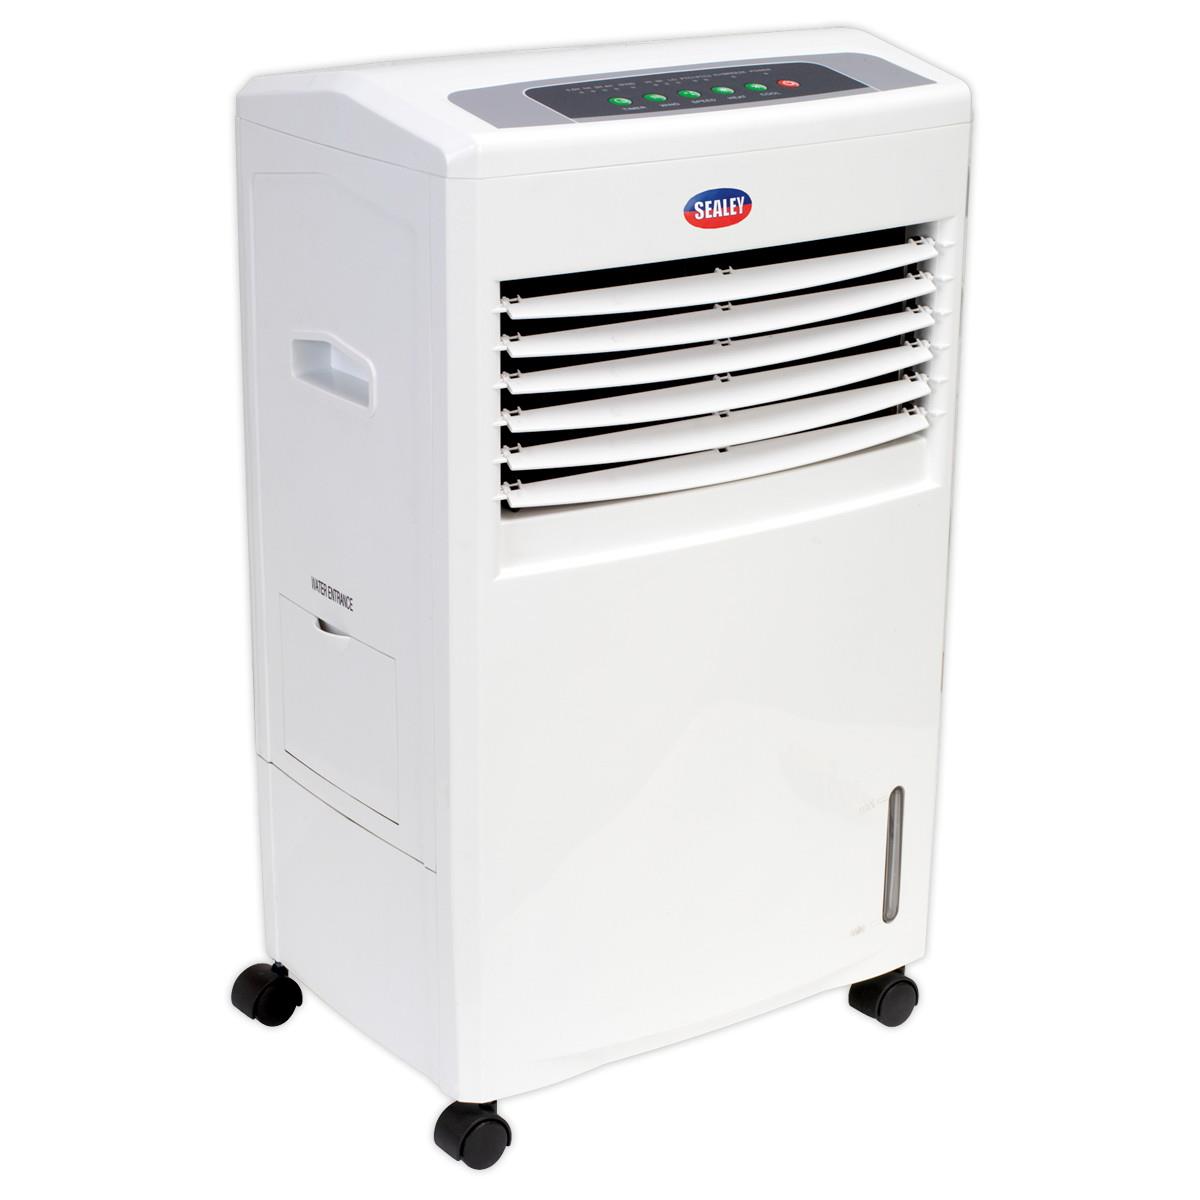 Sealey SAC41 Air Cooler/Heater/Purifier/ Humidifier With Remote Control; 8L Water Tank; 230 Volt